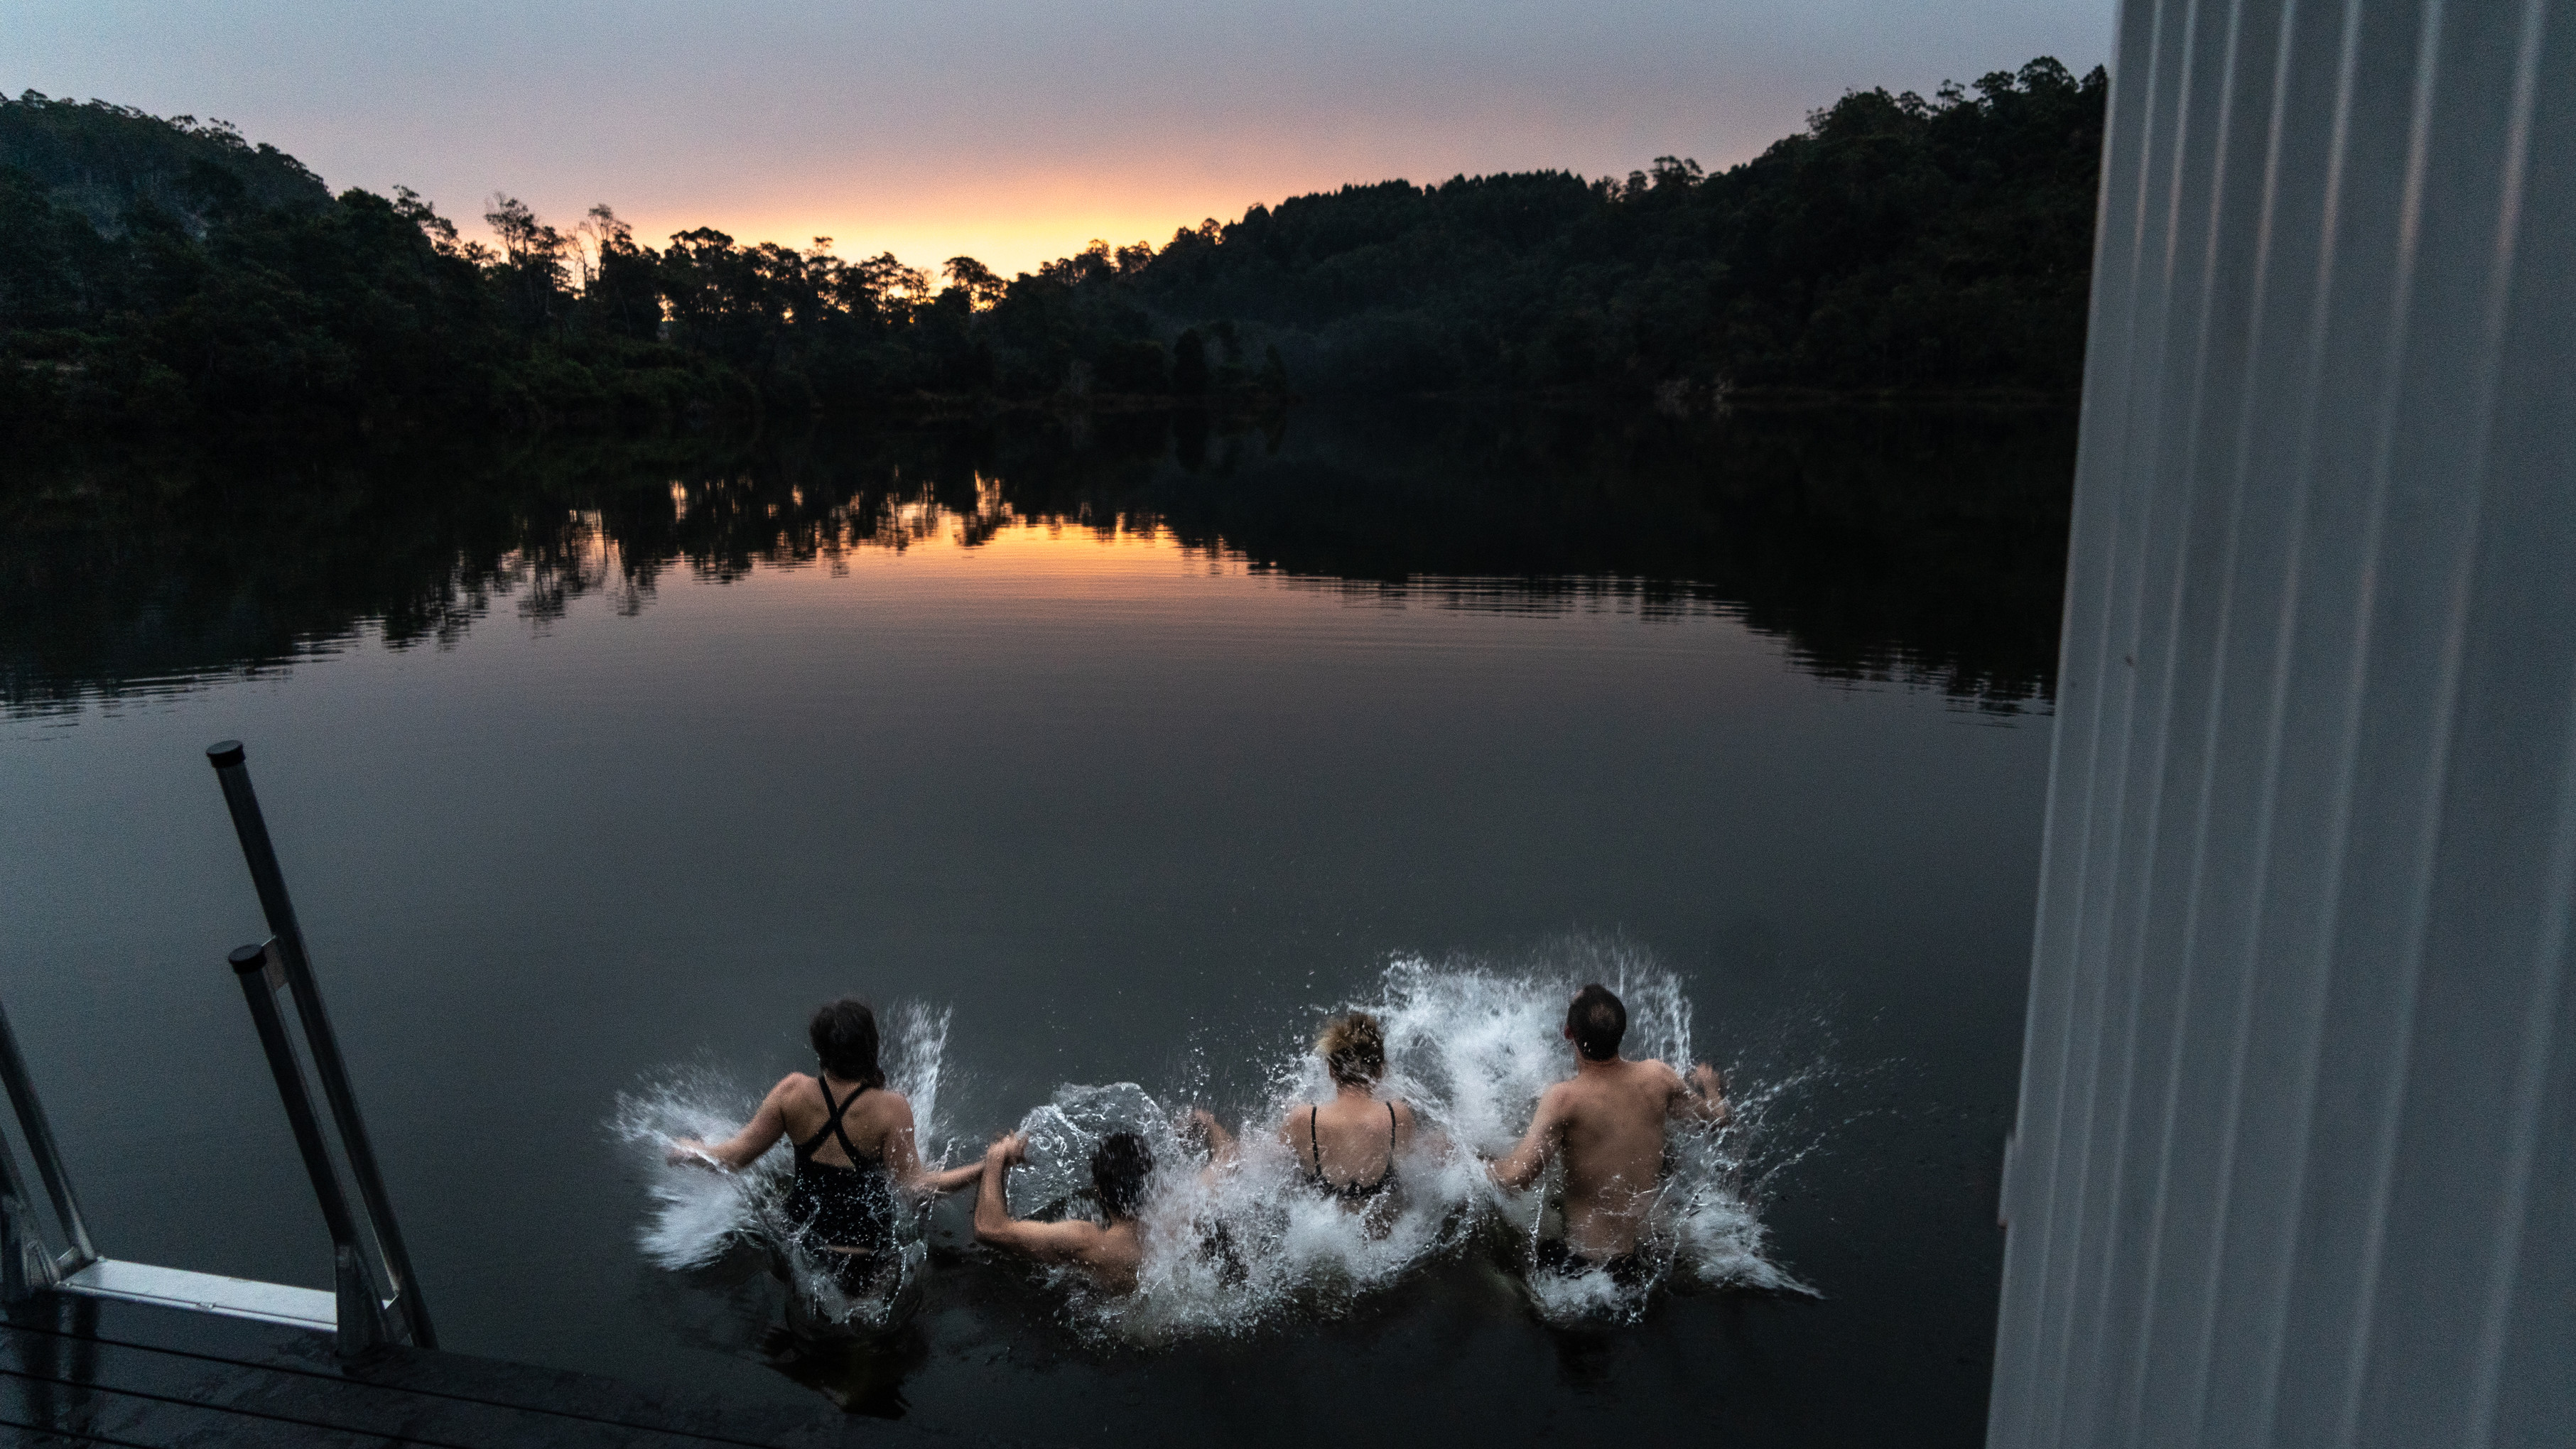 At dusk, four friends jump into the water holding hands at Floating Sauna Lake Derby.